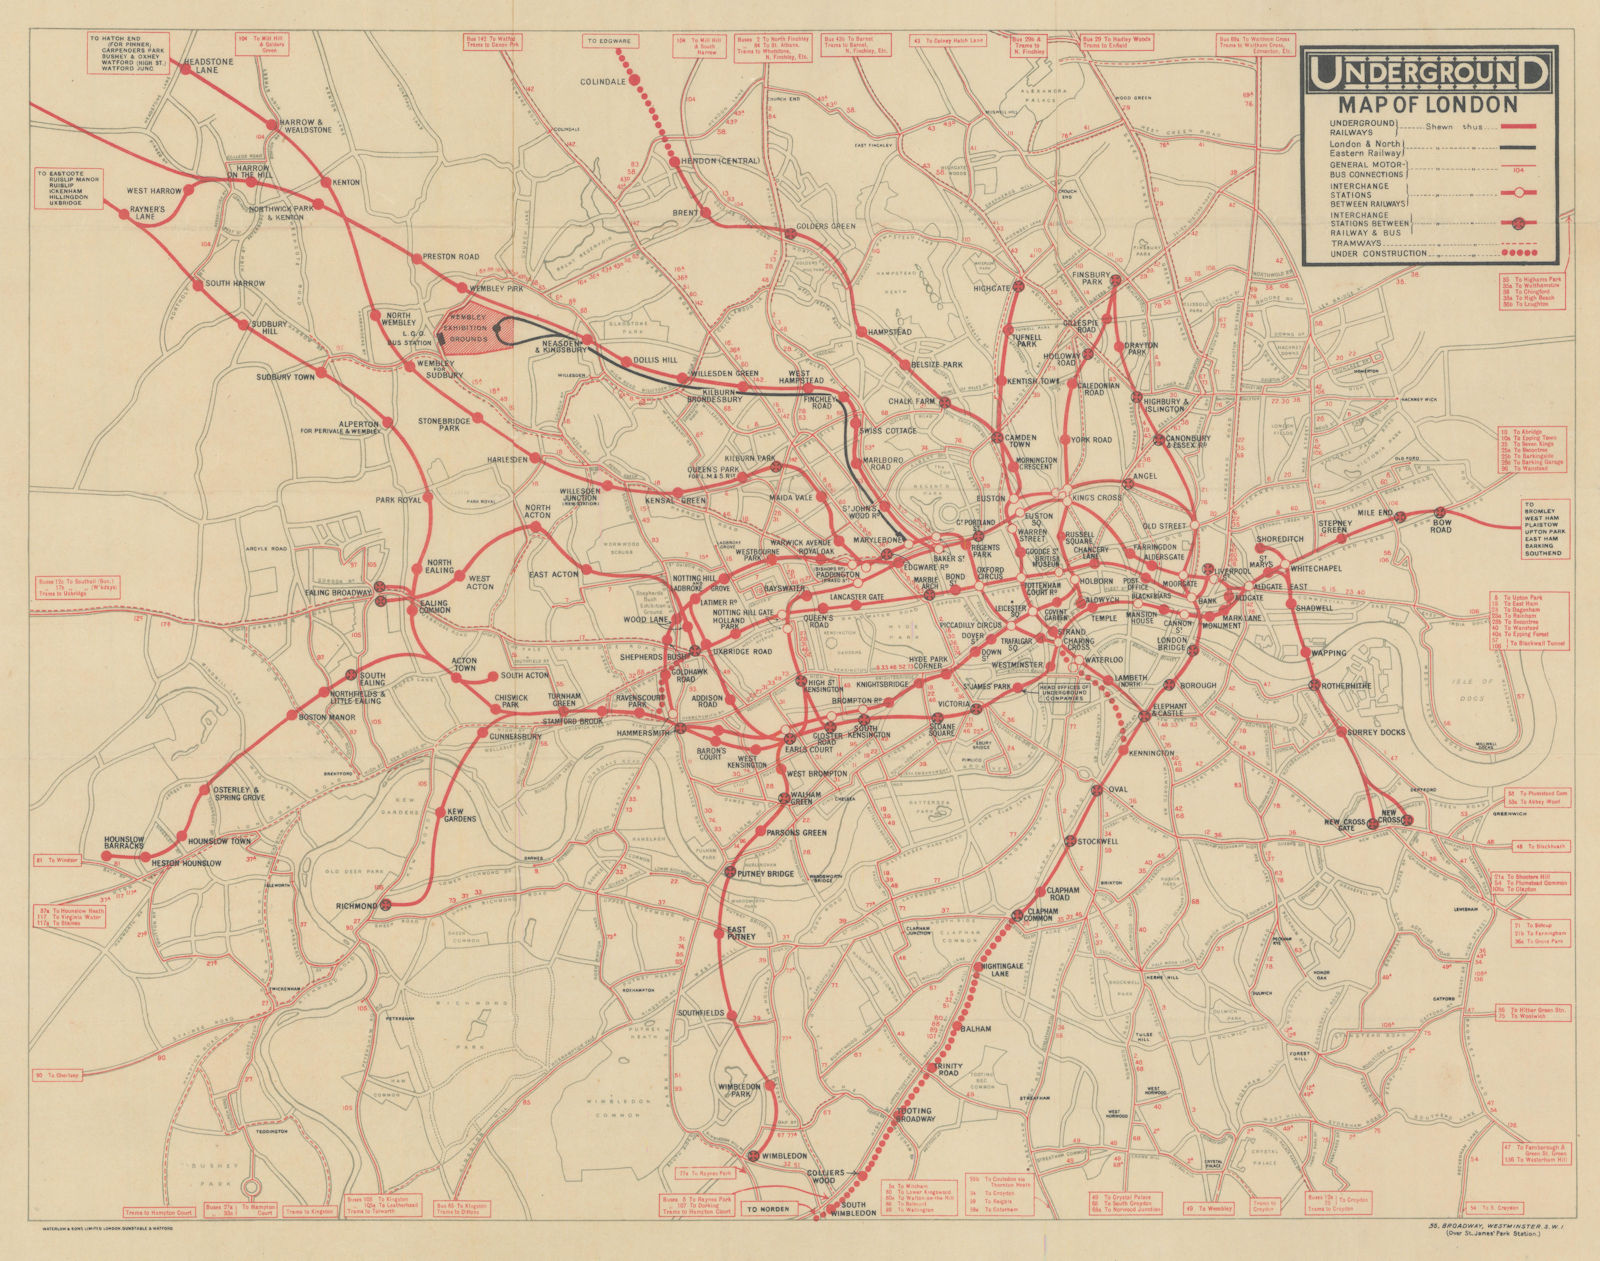 Underground Map of London. Tube network. No print code. June-August/mid 1924